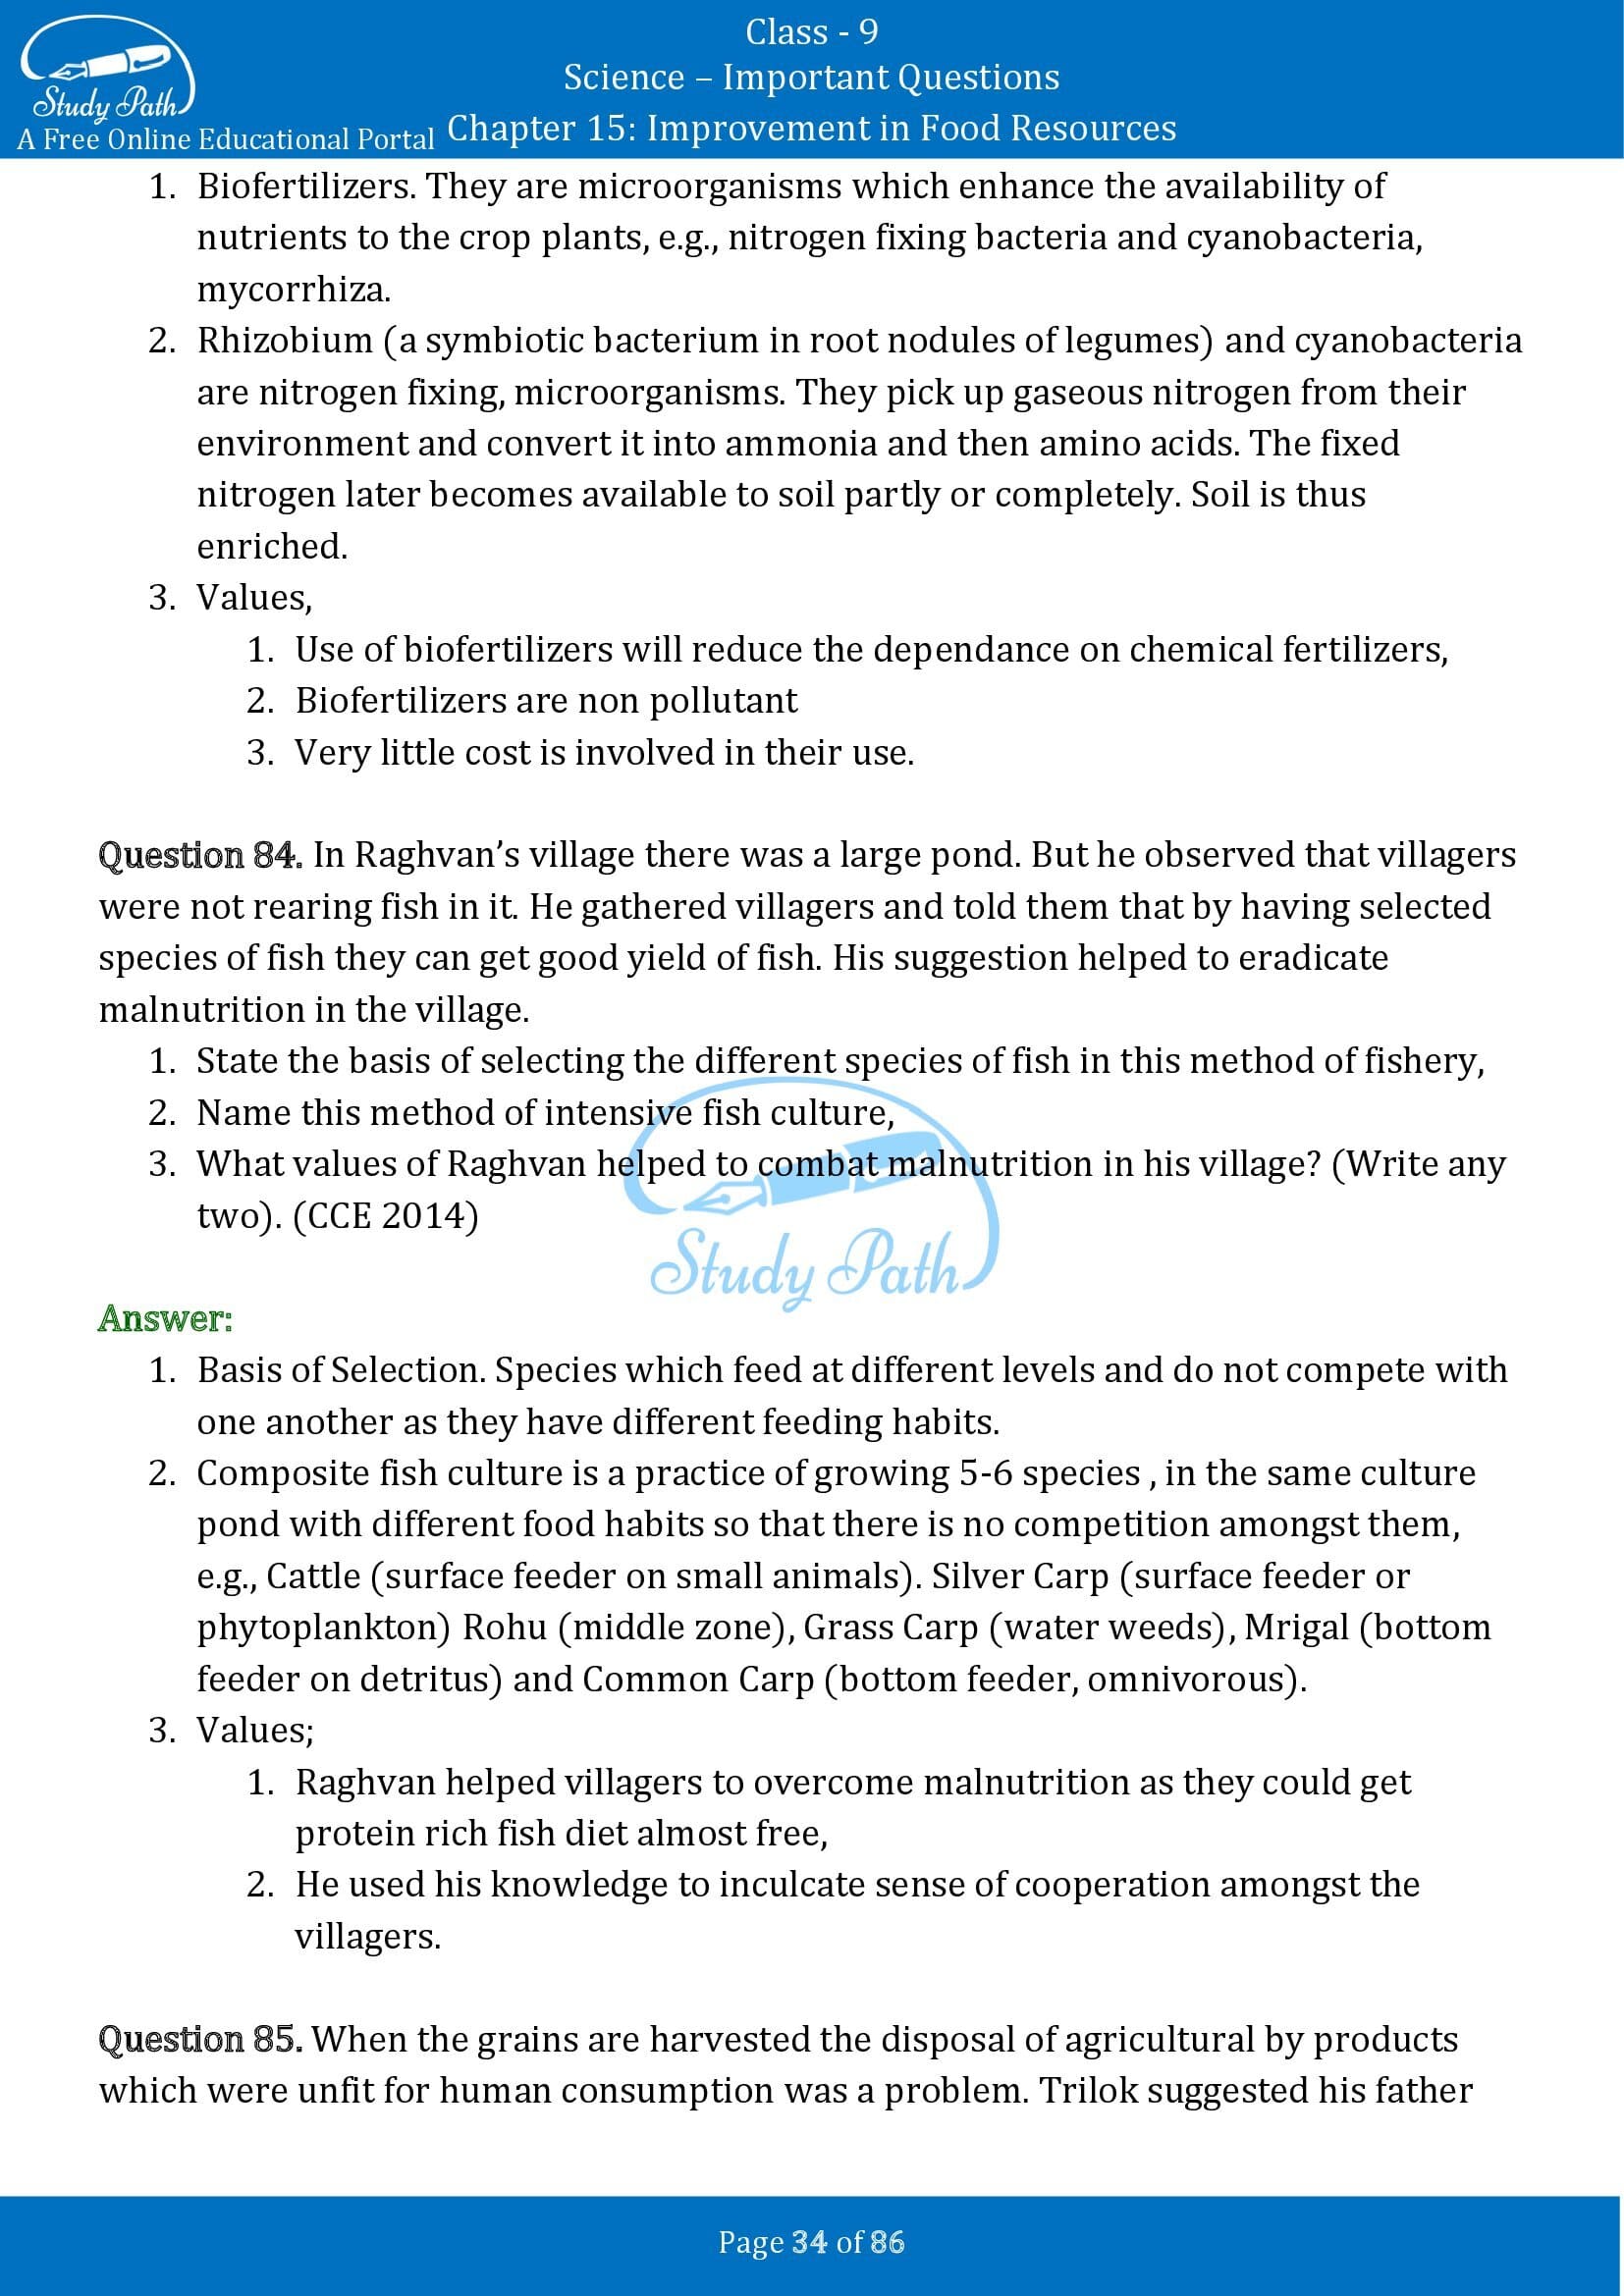 Important Questions for Class 9 Science Chapter 15 Improvement in Food Resources 00034